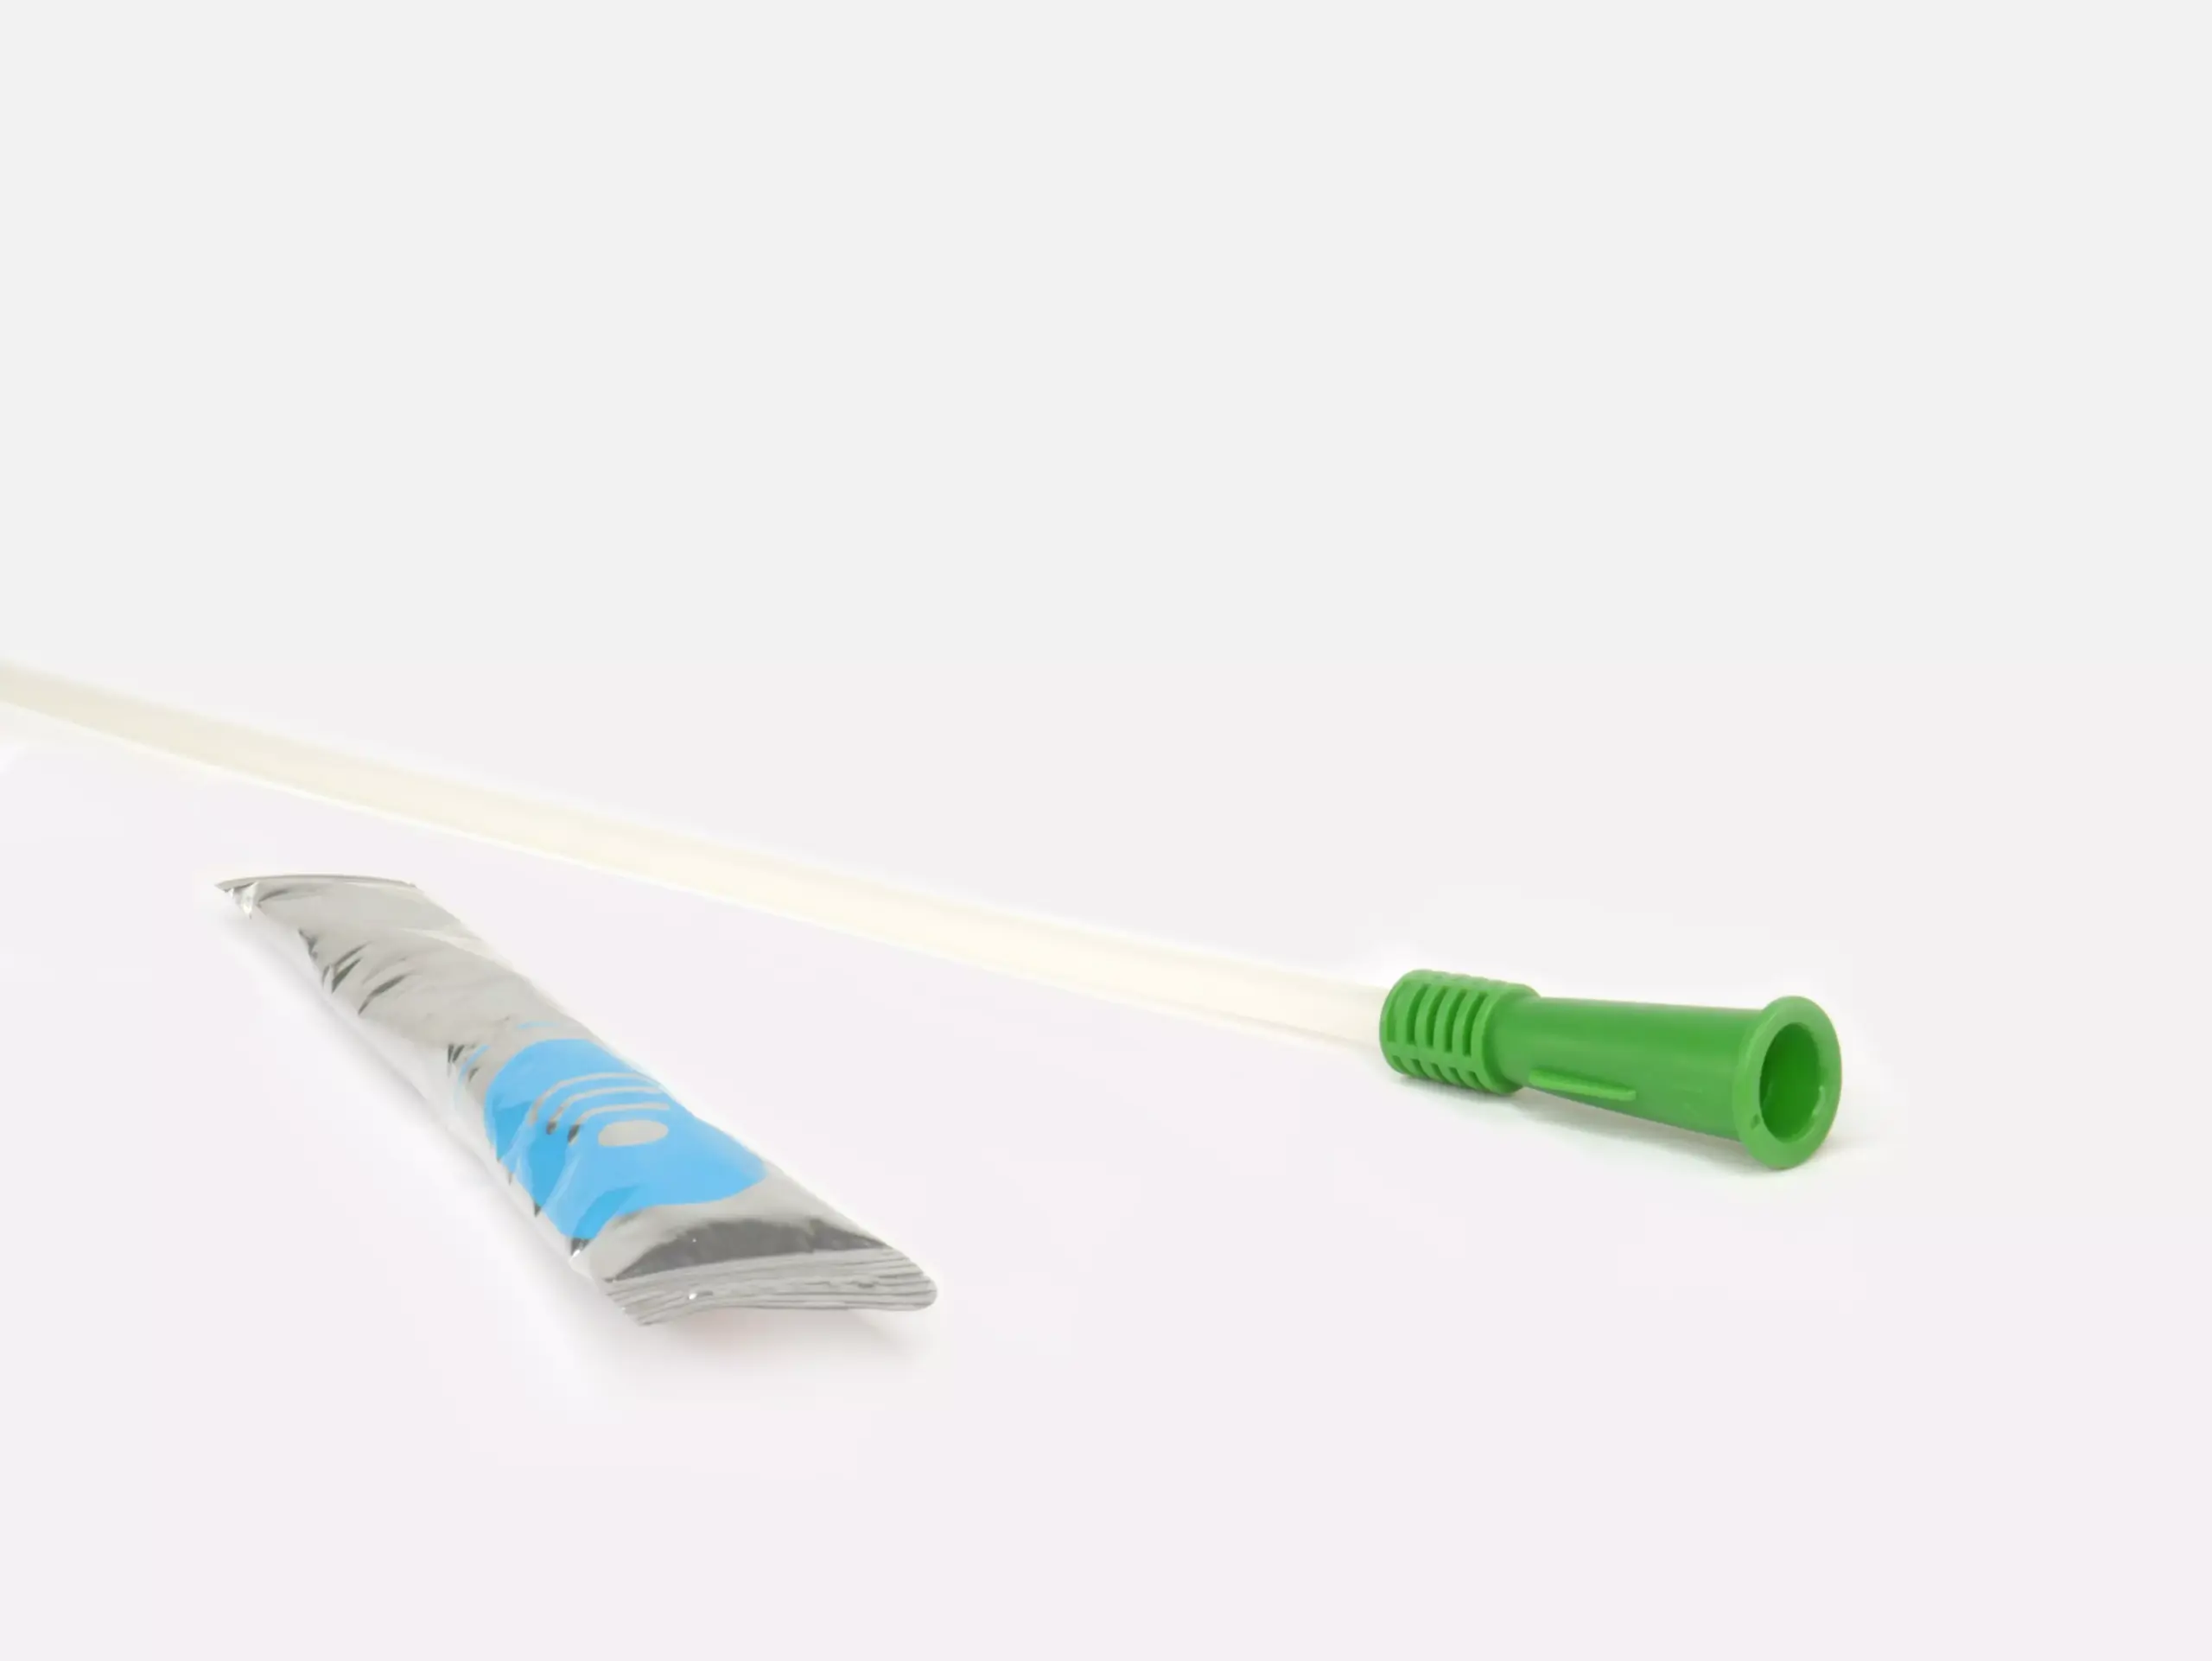 Photograph of a RA Fischer Co. Cure brand catheter with a green grip, positioned next to a silver-colored water packet, against a white background. [ Personalized urology care ]